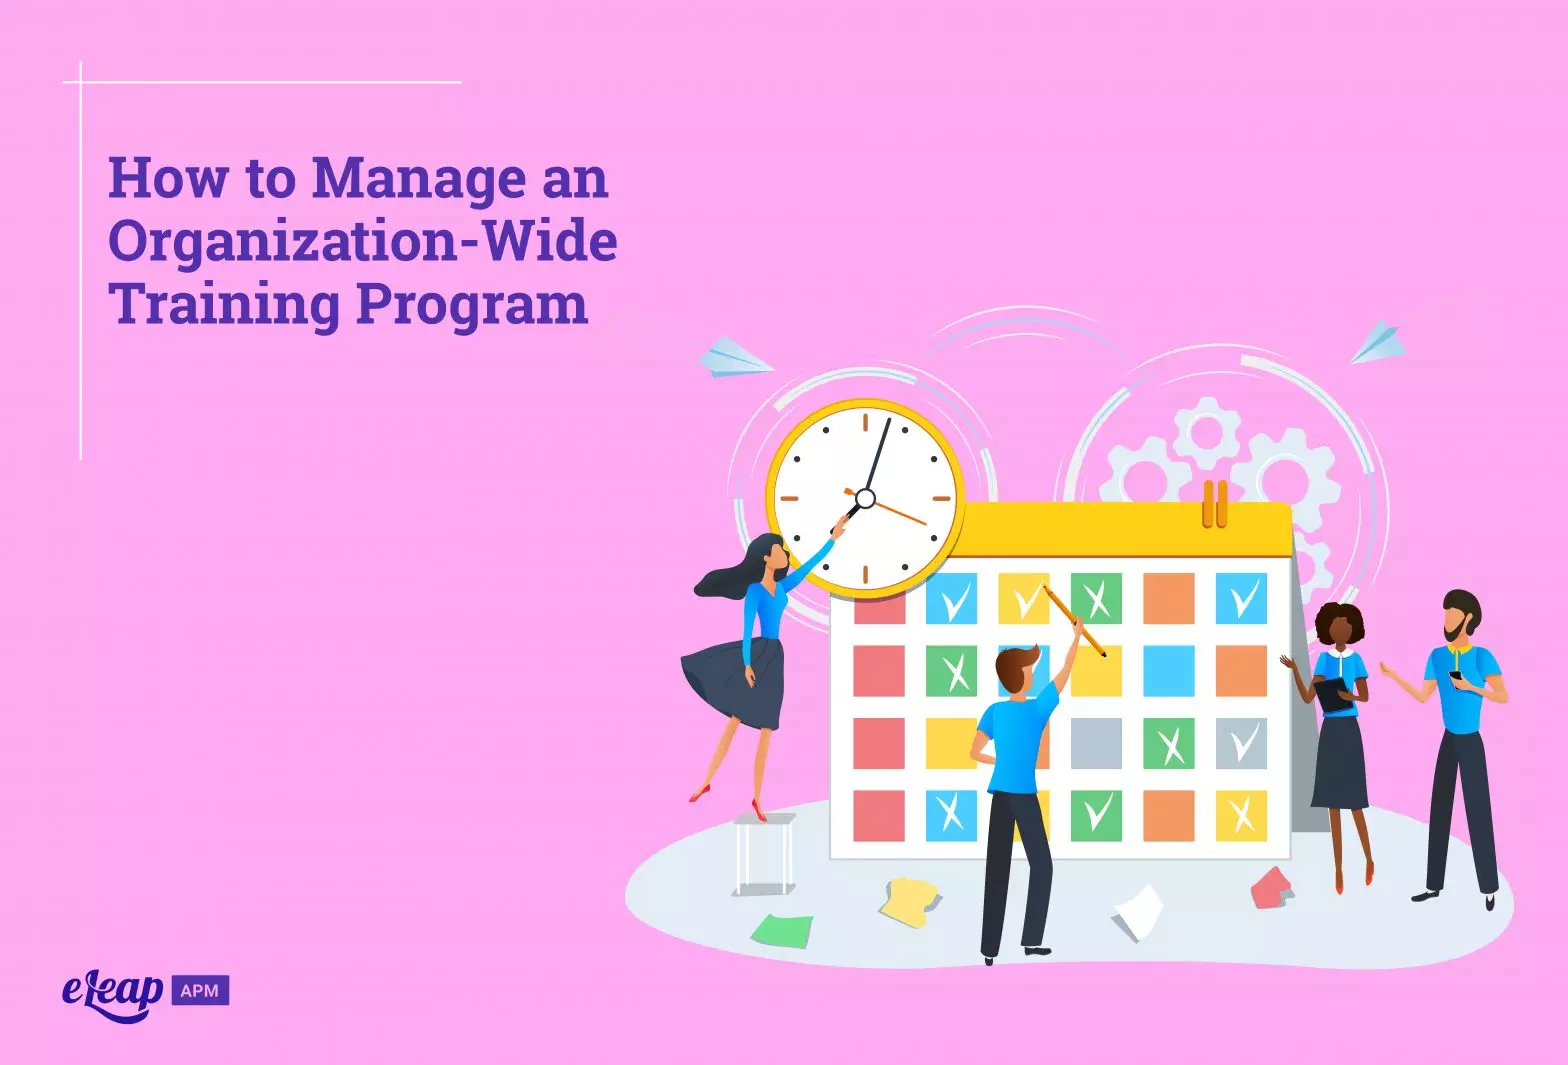 How to Manage an Organization-Wide Training Program